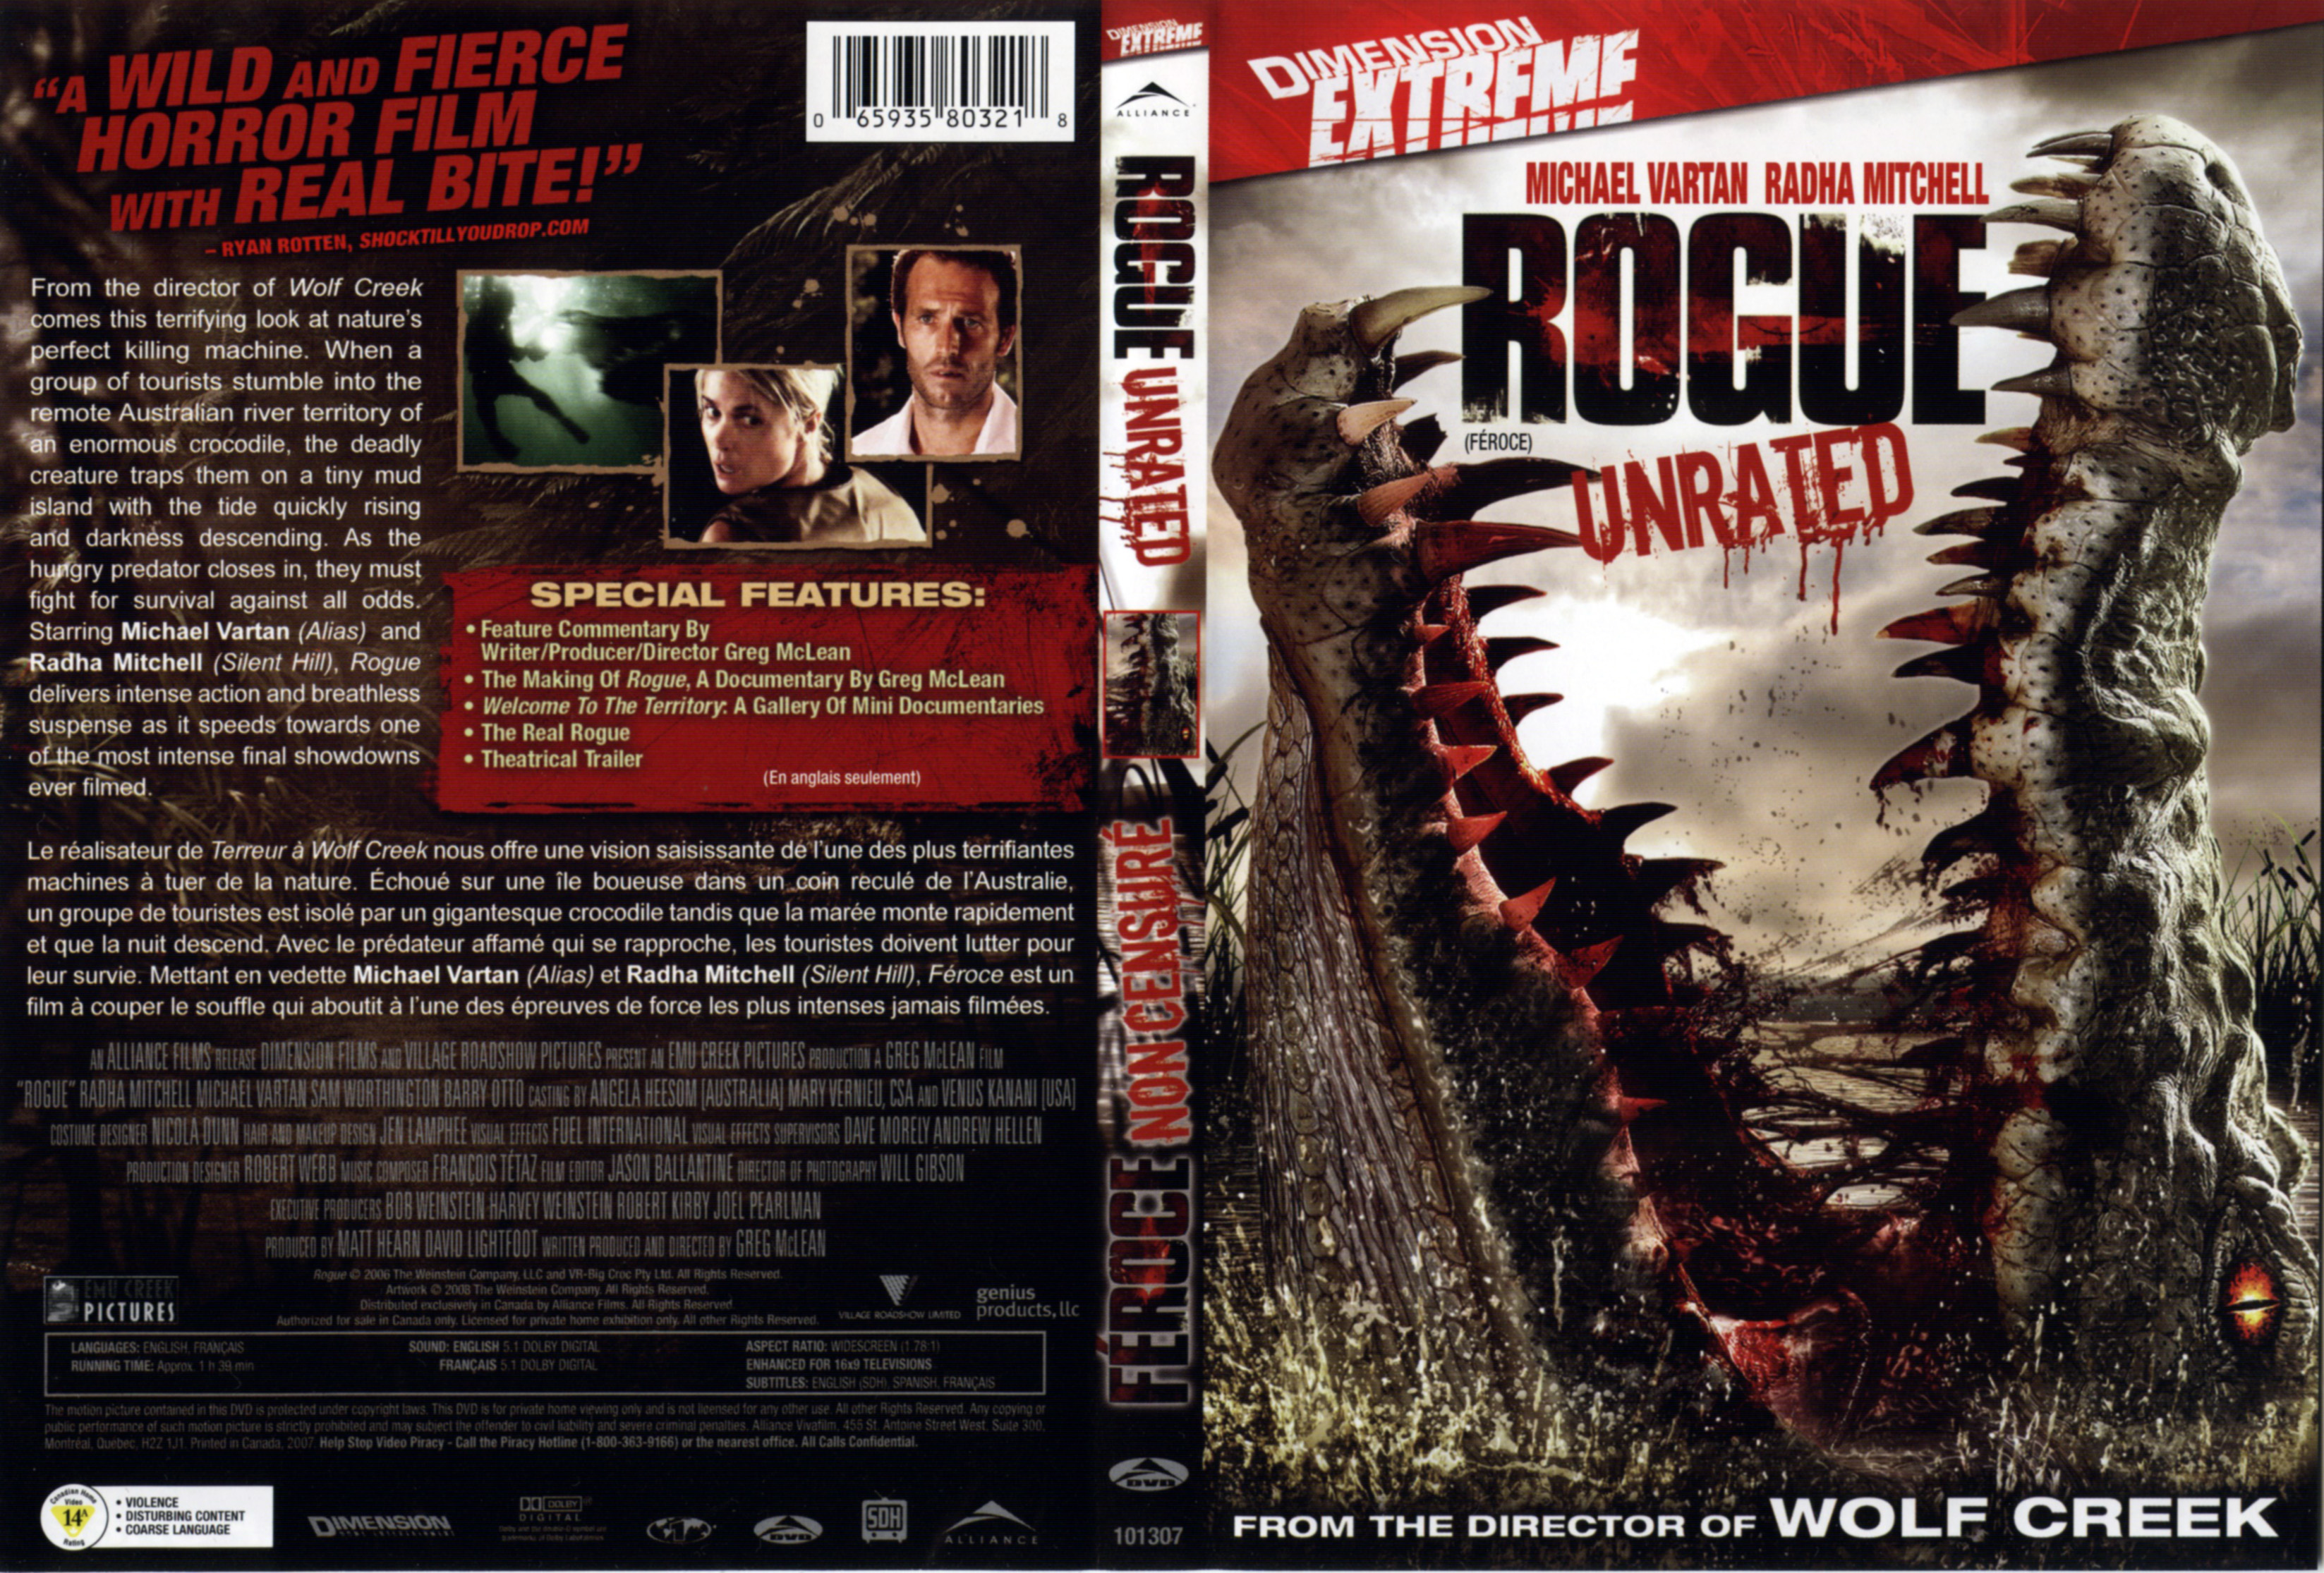 Jaquette DVD Rogue - Froce